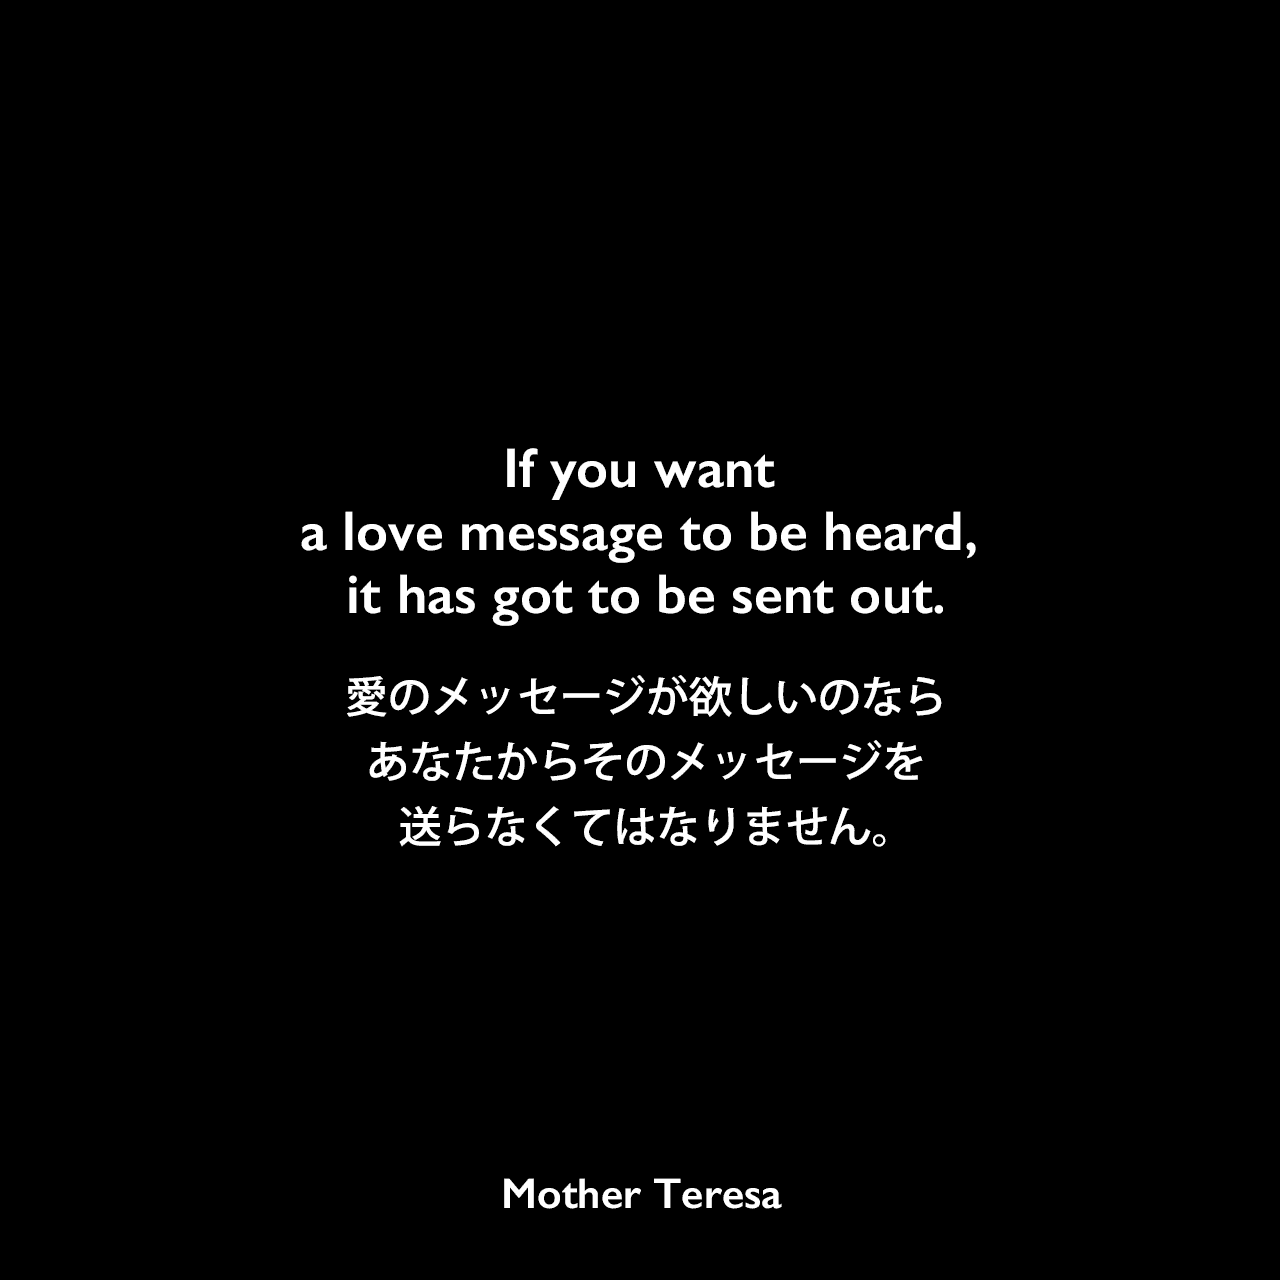 If you want a love message to be heard, it has got to be sent out.愛のメッセージが欲しいのなら、あなたからそのメッセージを送らなくてはなりません。Mother Teresa